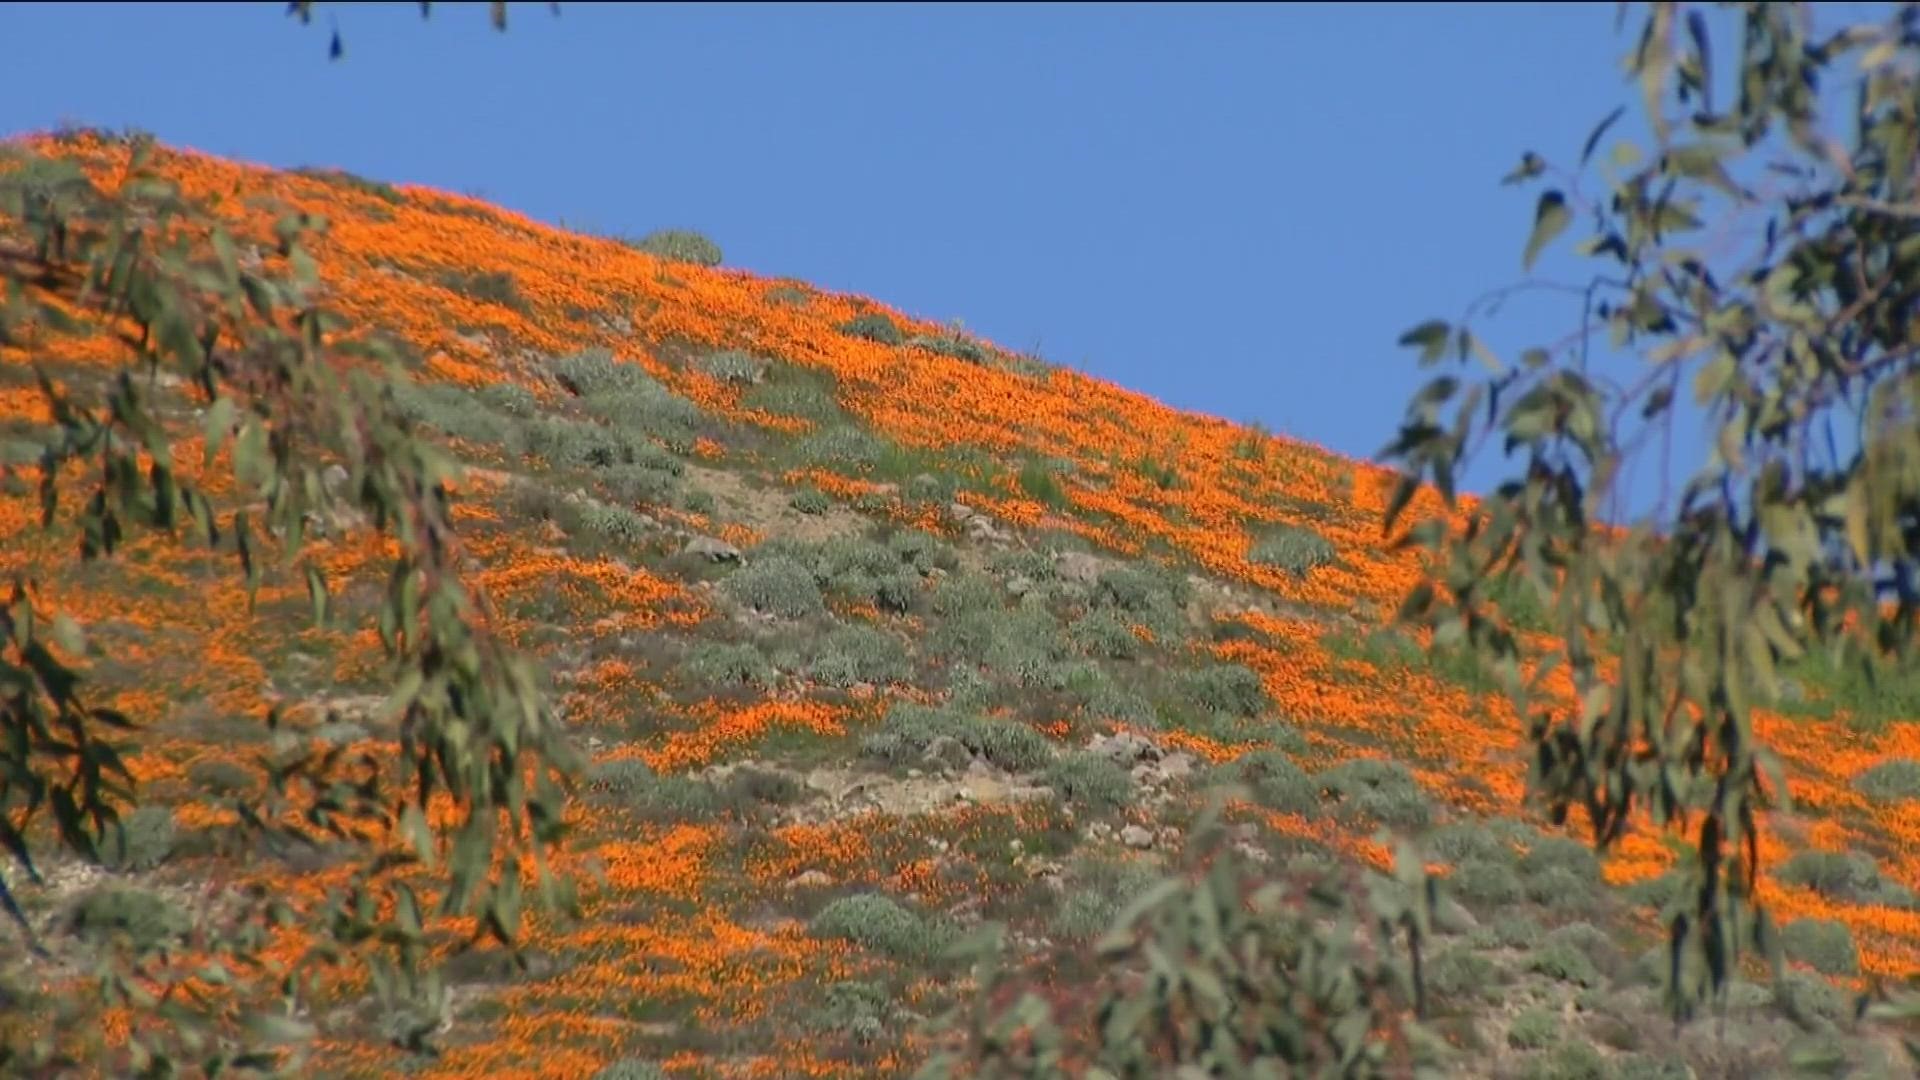 Golden poppy blooms were spotted in Lake Elsinore, but the city shut down access to the main hiking trail in hopes of avoiding the chaos that ensued in 2019.